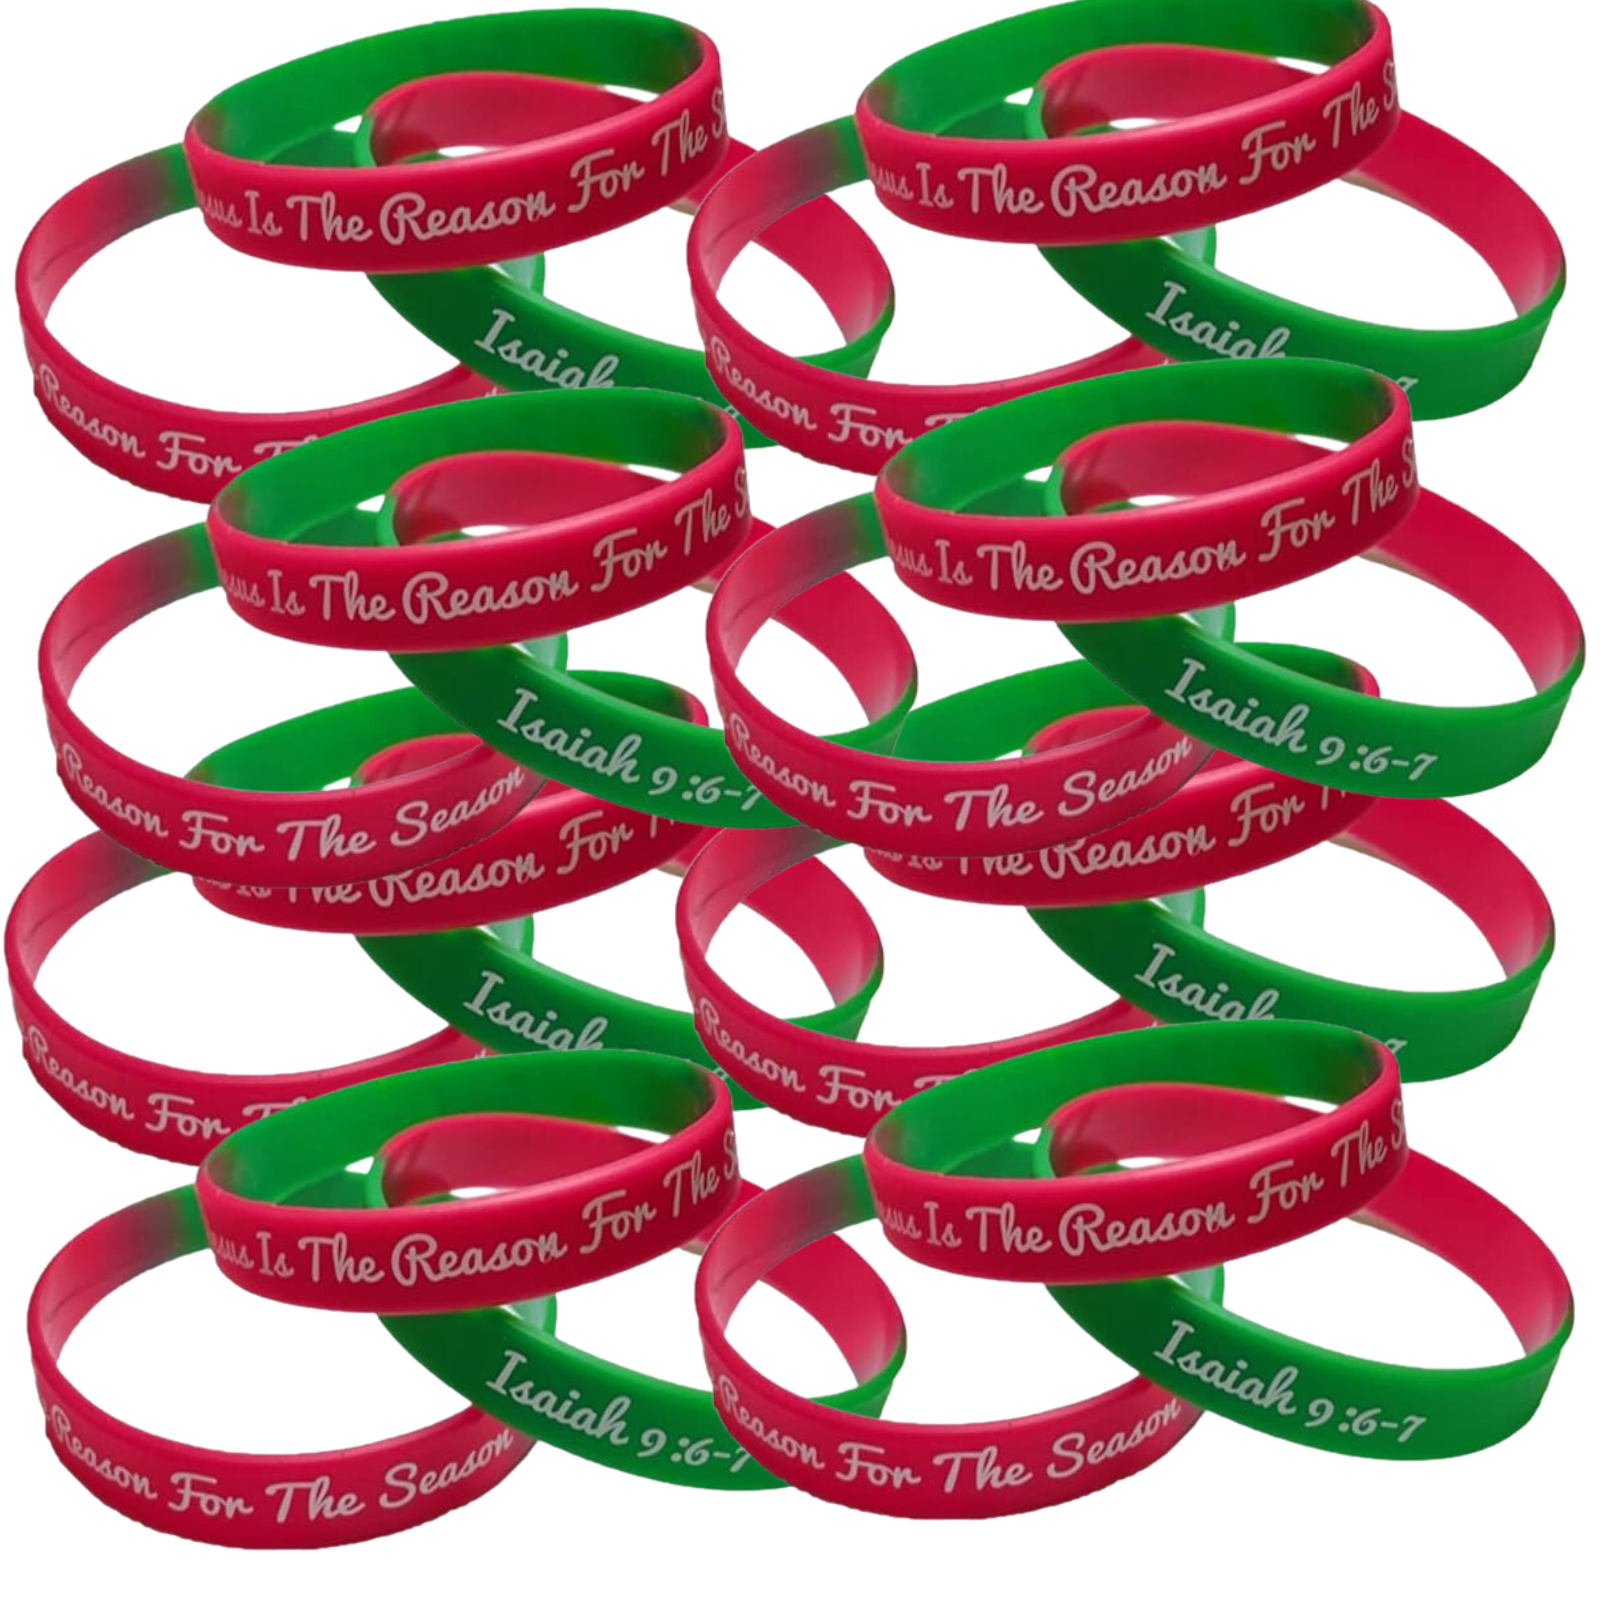 Amazon.com: 100 Count Bulk Jesus is The Reason for The Season Bracelets  Isaiah 9:6-7 Christmas Silicone Wristbands Red Green Christian Party Favors  for Men and Women : Toys & Games